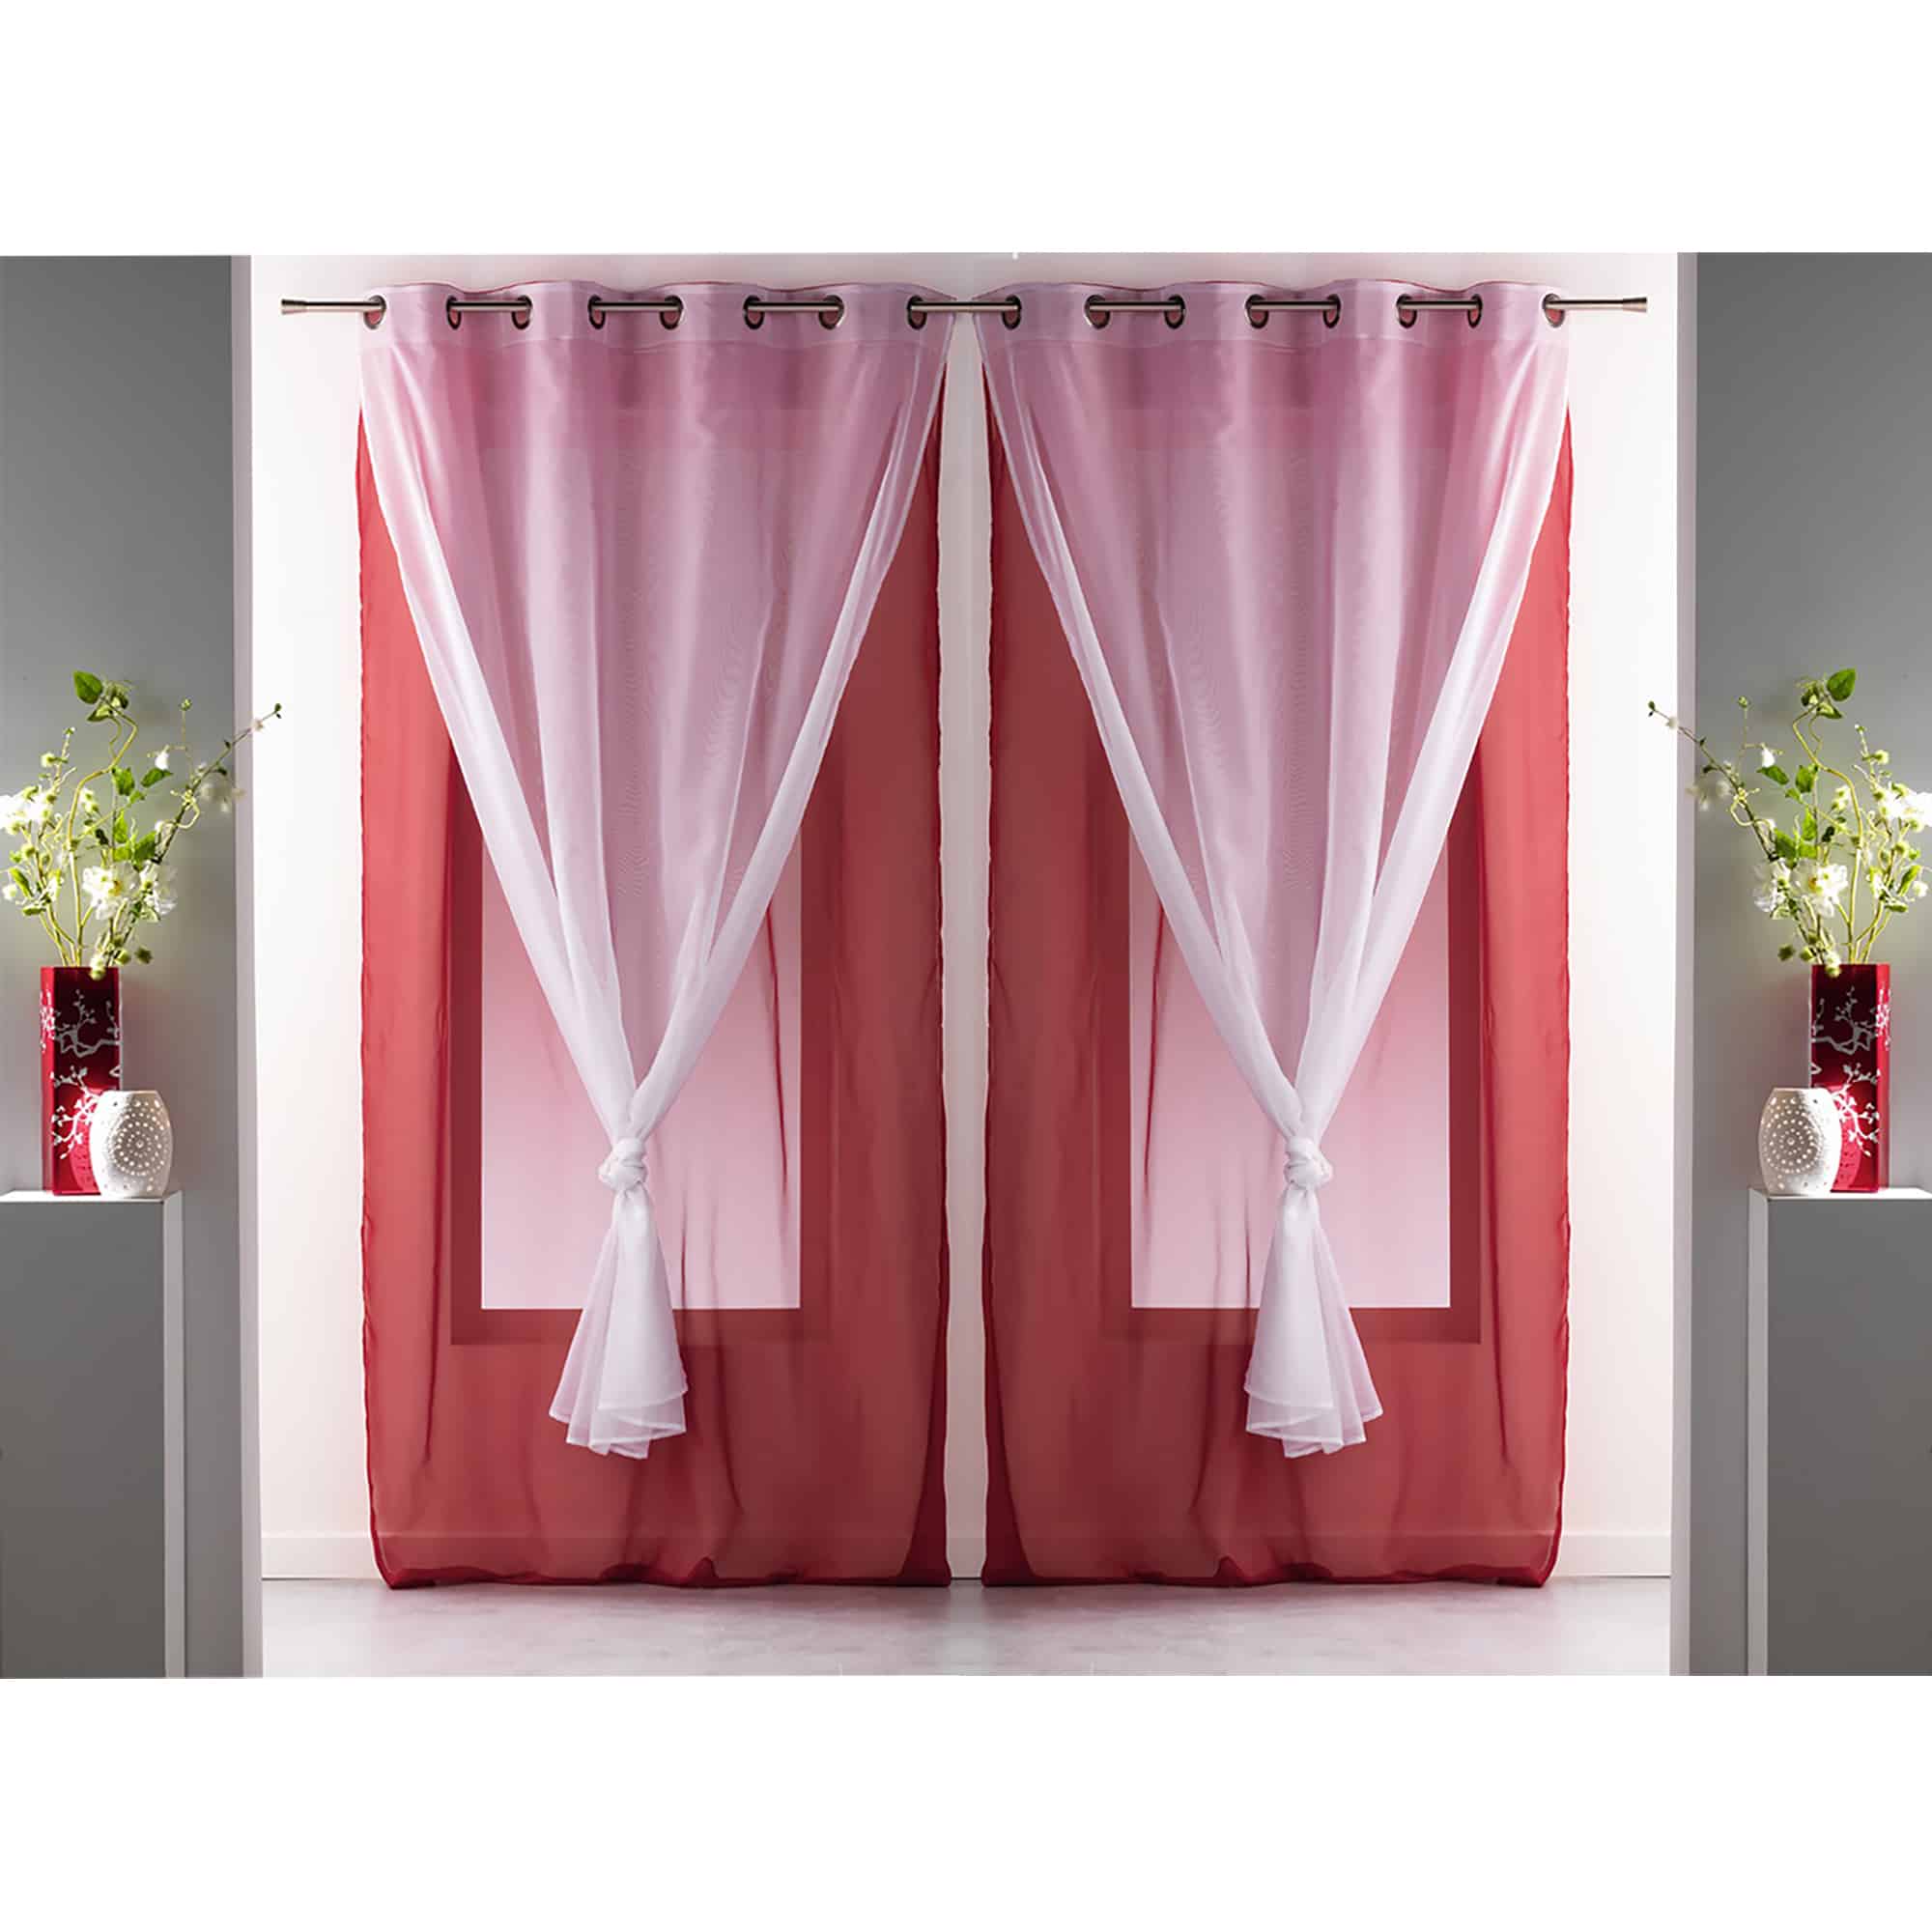 double sheer curtains solid 2 colors red white set of 2 panels for large window